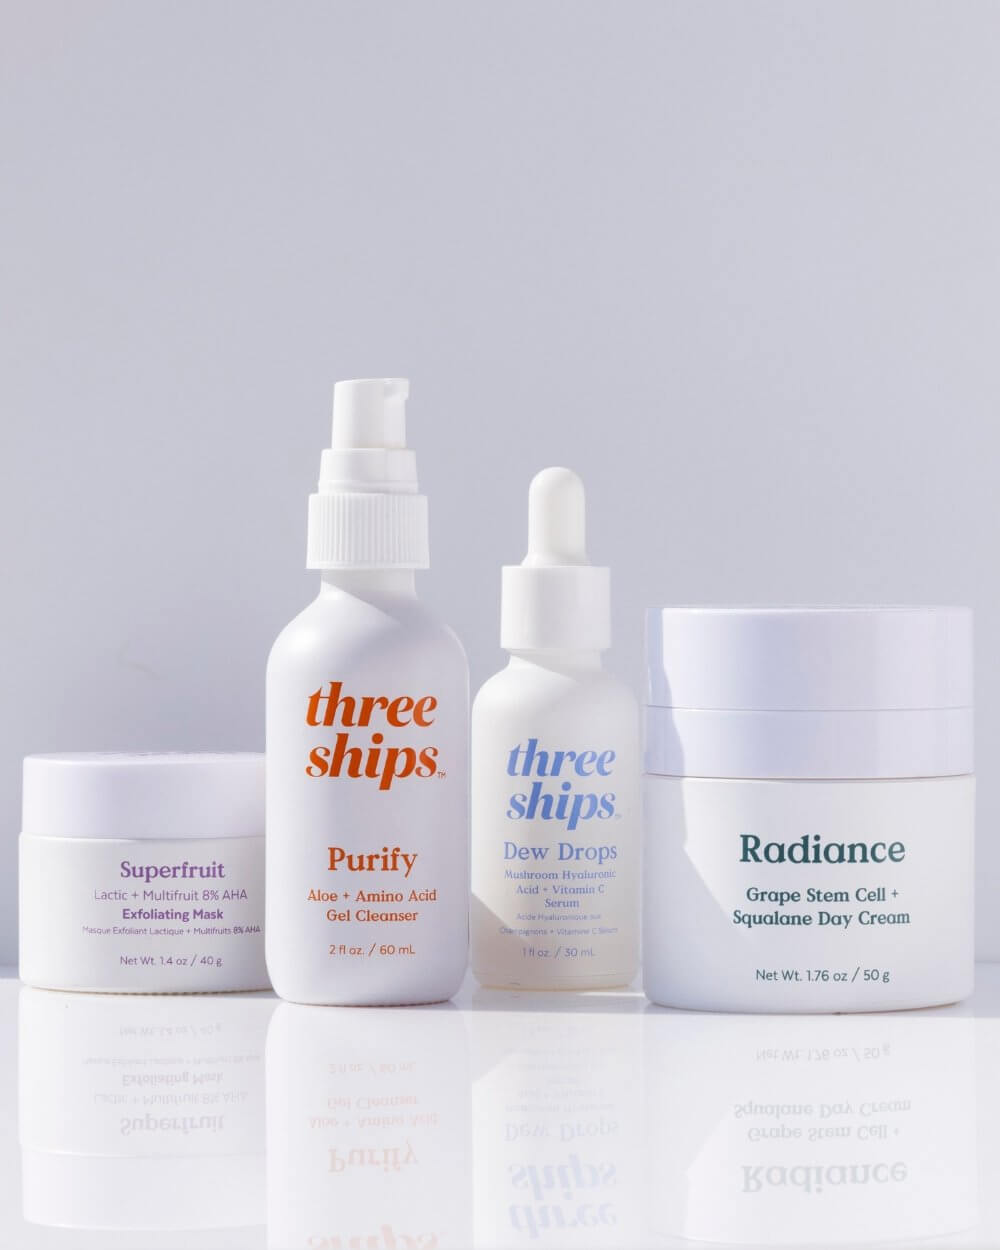 Best-Sellers Limited Time Bundle Offer Three Ships TRIAL KIT Natural Vegan Cruelty-free Skincare